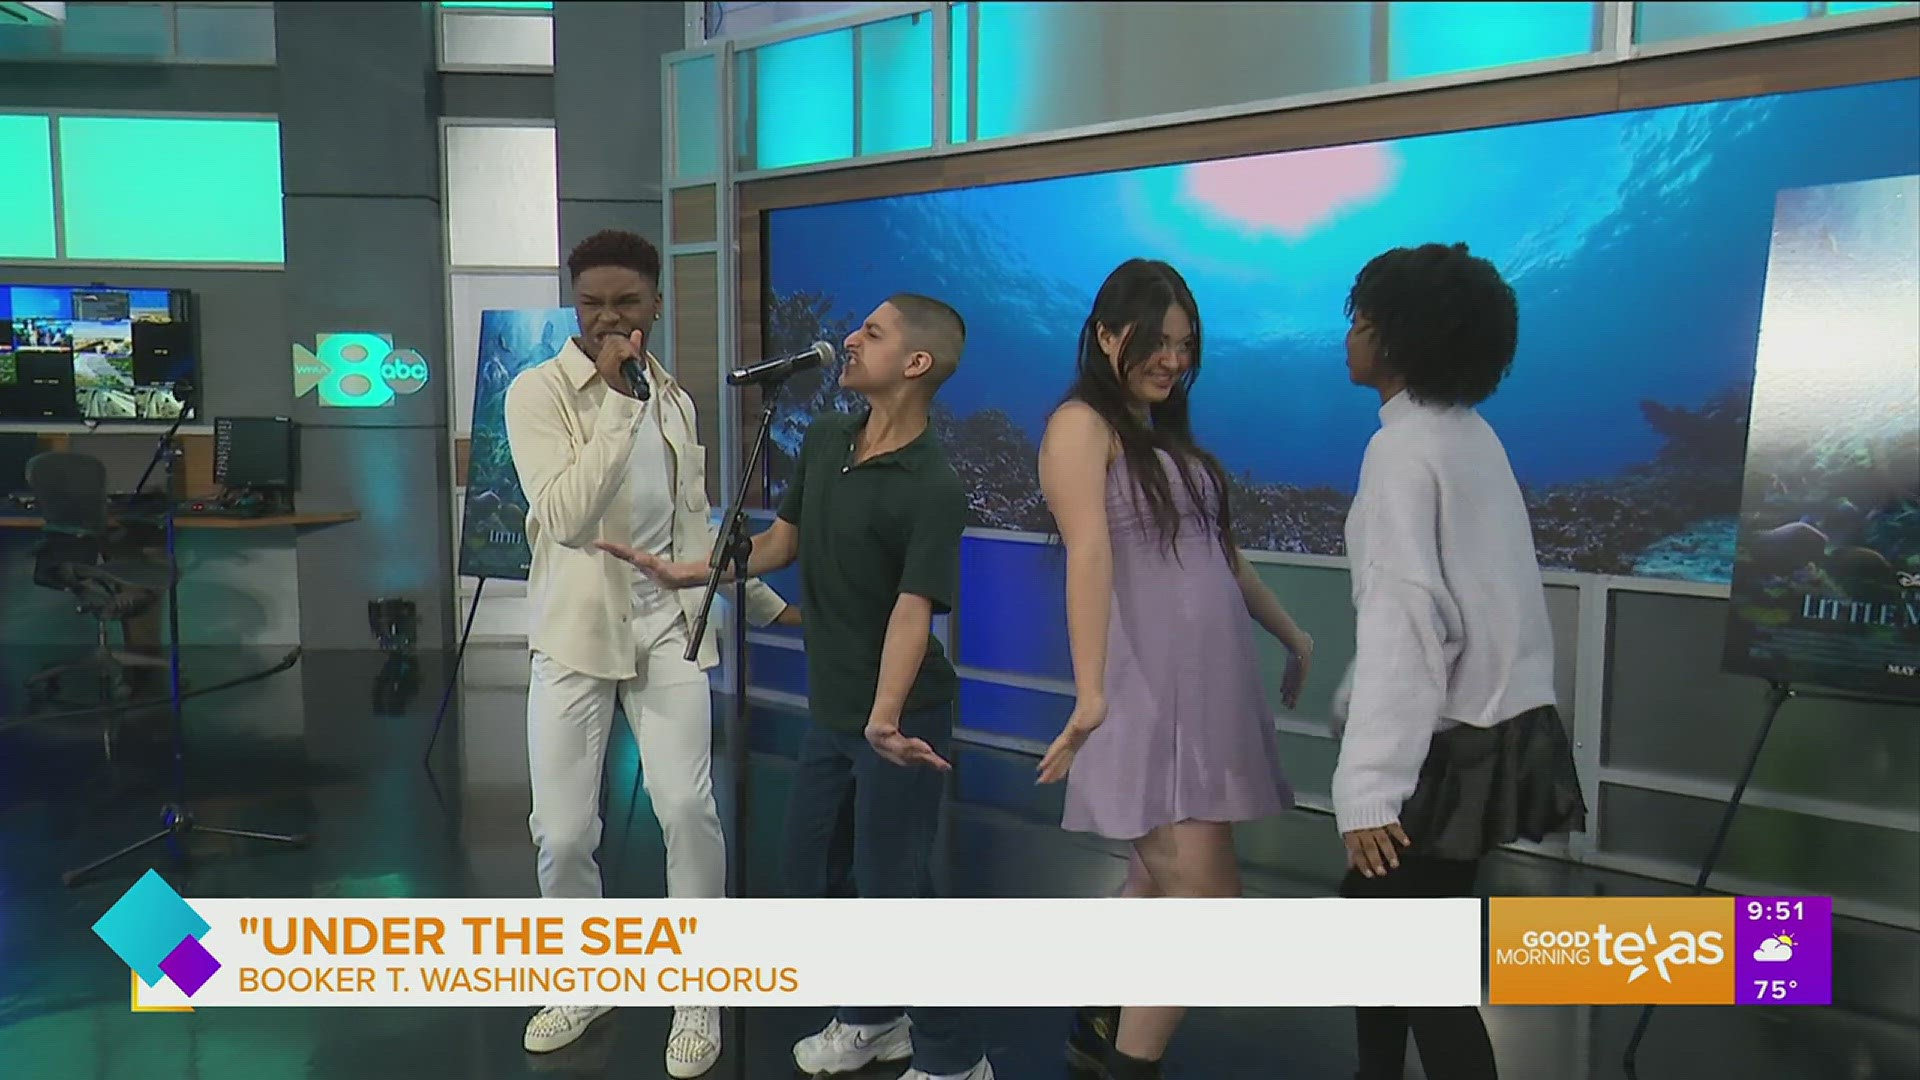 The Little Mermaid live action is officially in theaters – students from Booker T. Washington splashed into studio to help us celebrate.